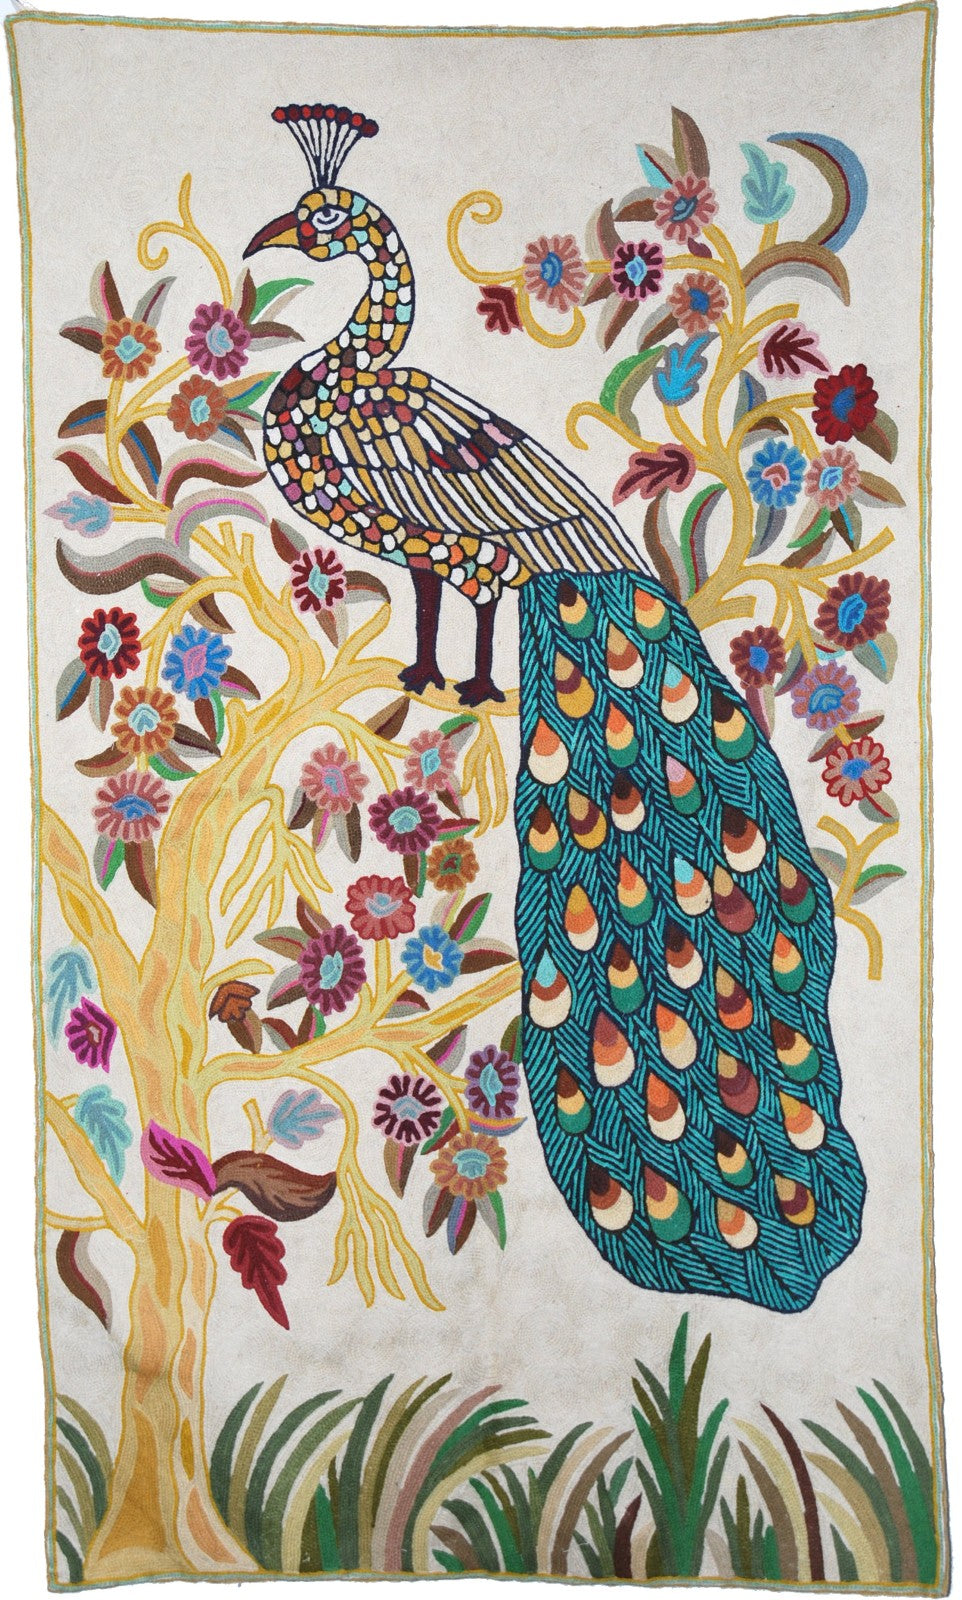 Kashmiri Wool Tapestry Area Rug "Peacock", Multicolor Embroidery 3x5 feet #CWR15120